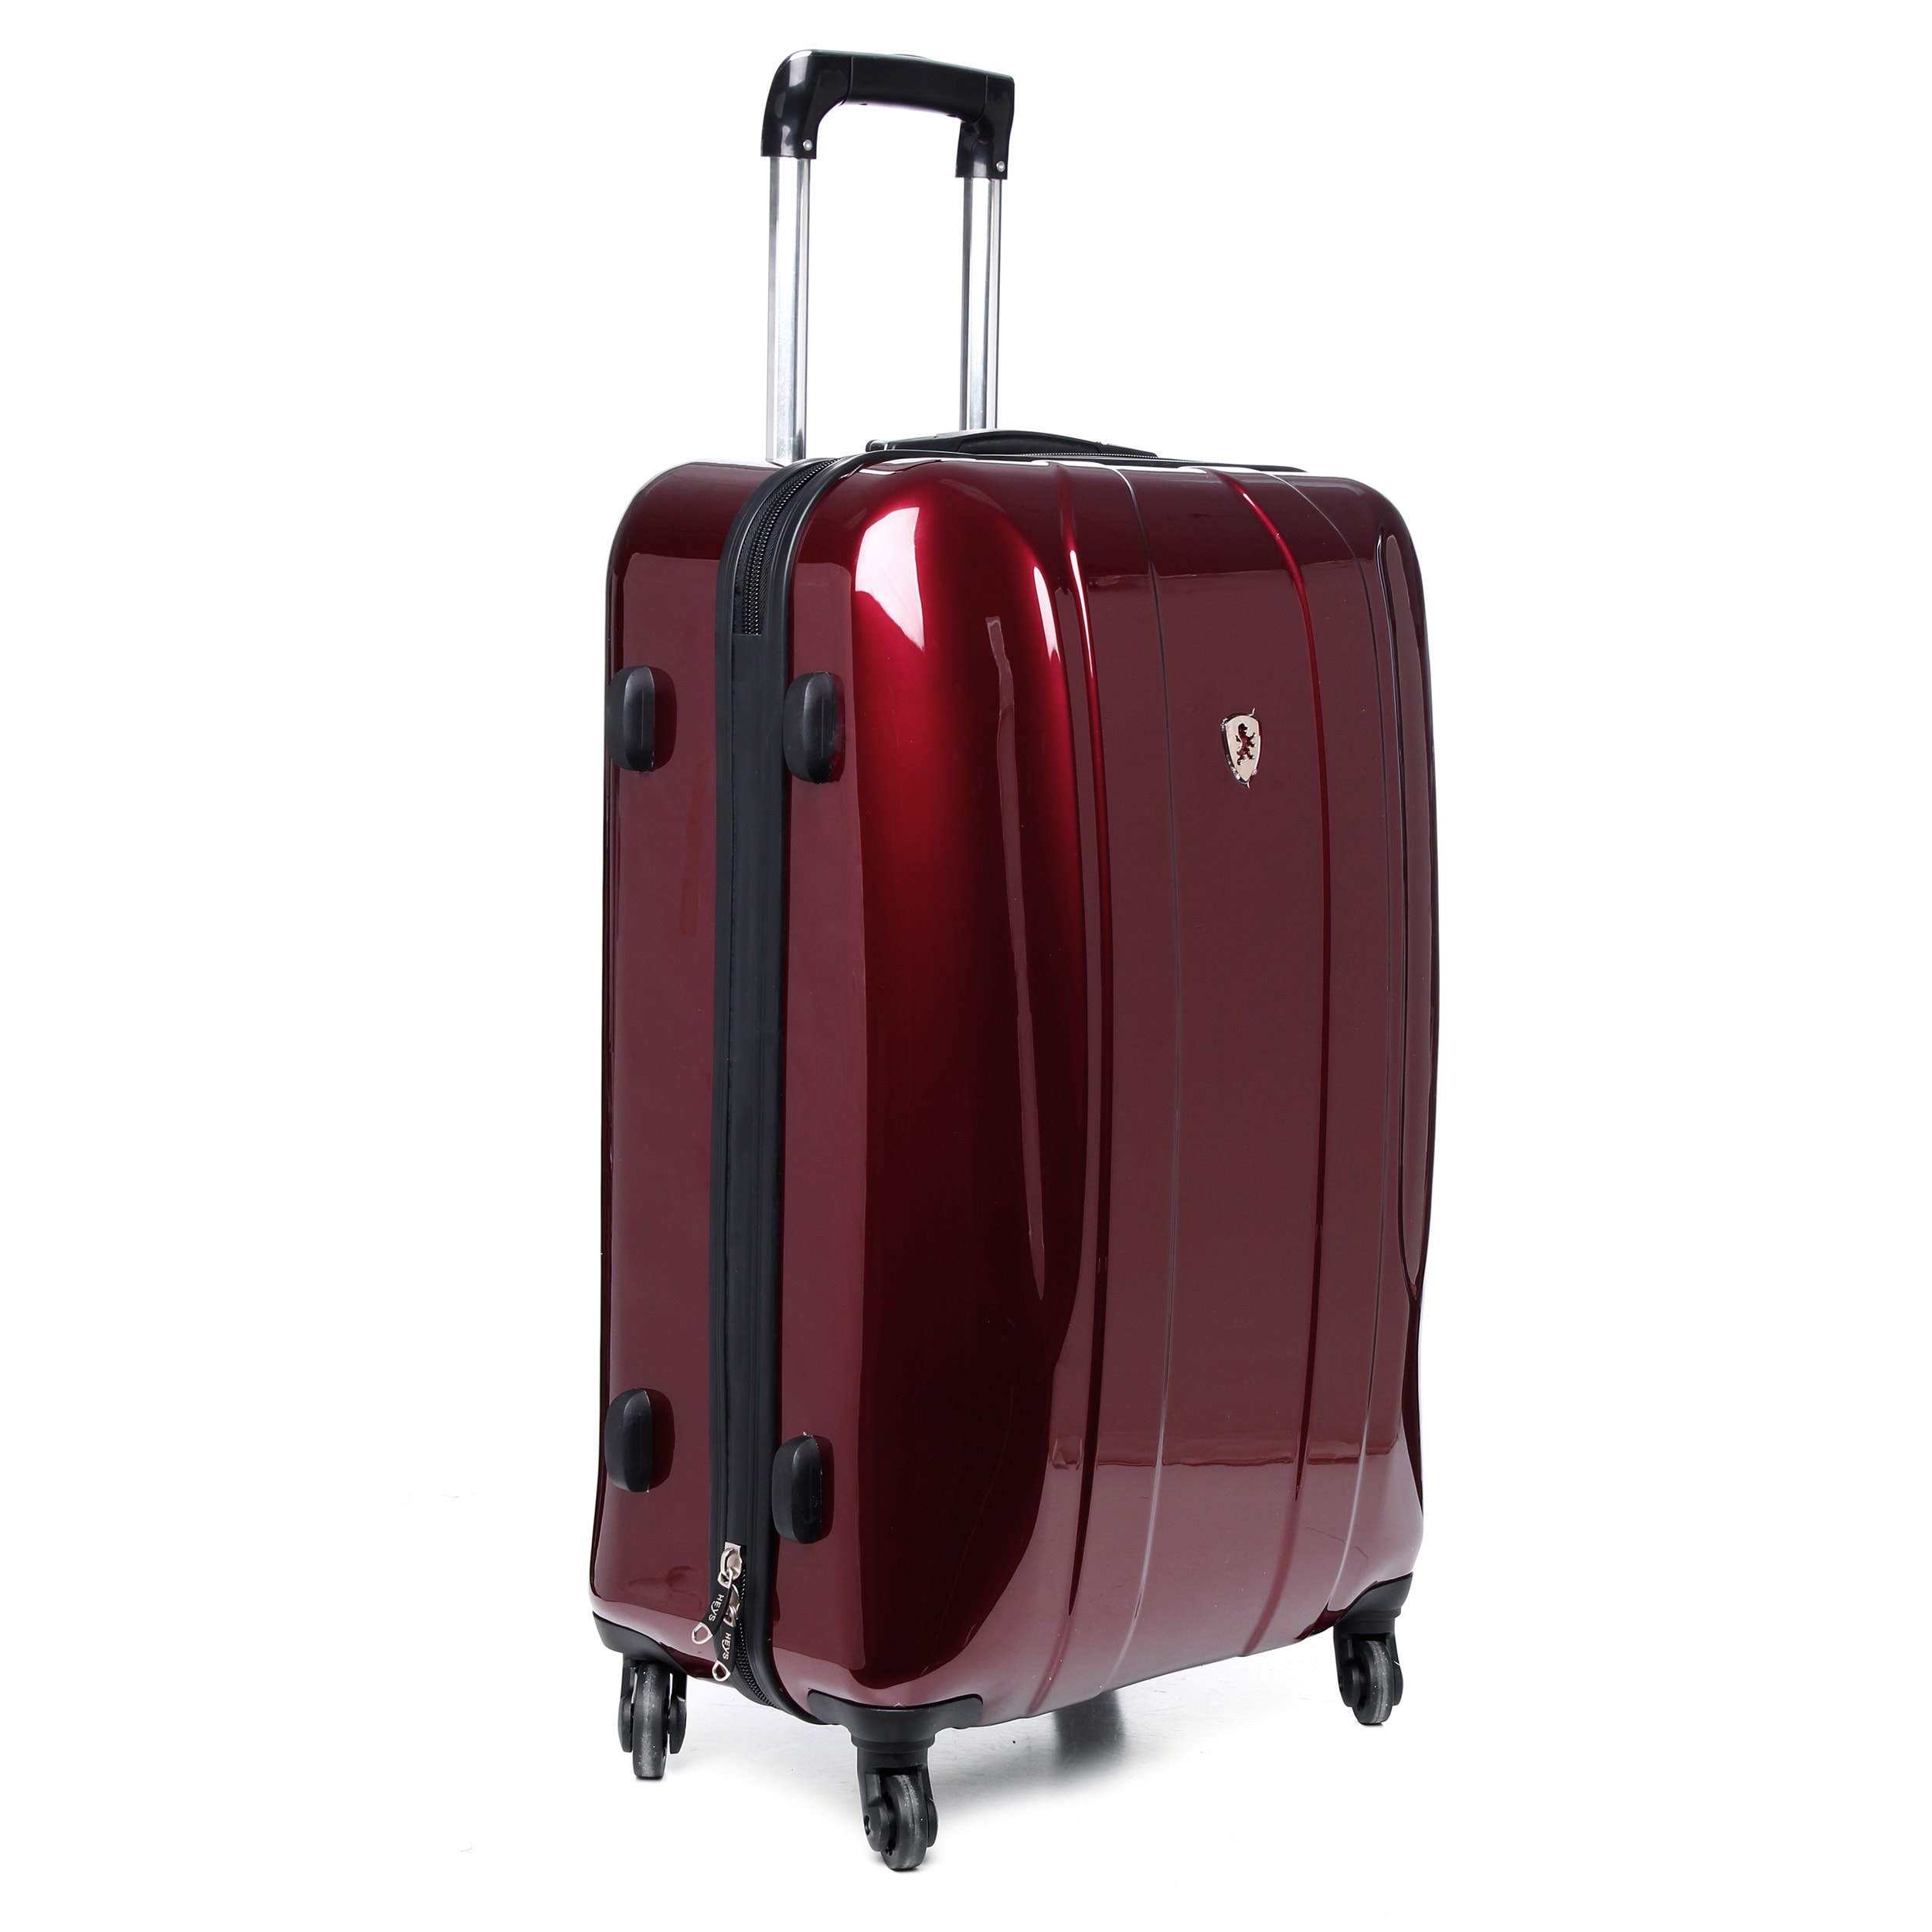 Heys Usa Duval 30 inch Large Hardside Spinner Upright Suitcase (RedWeight 11.9 poundsPockets Two (2) interior pocketCarrying strap One (1) top handle, one (1) side handleHandle YesWheeledWheel type SpinnerClosure ZipperLocks/keys included No (combi